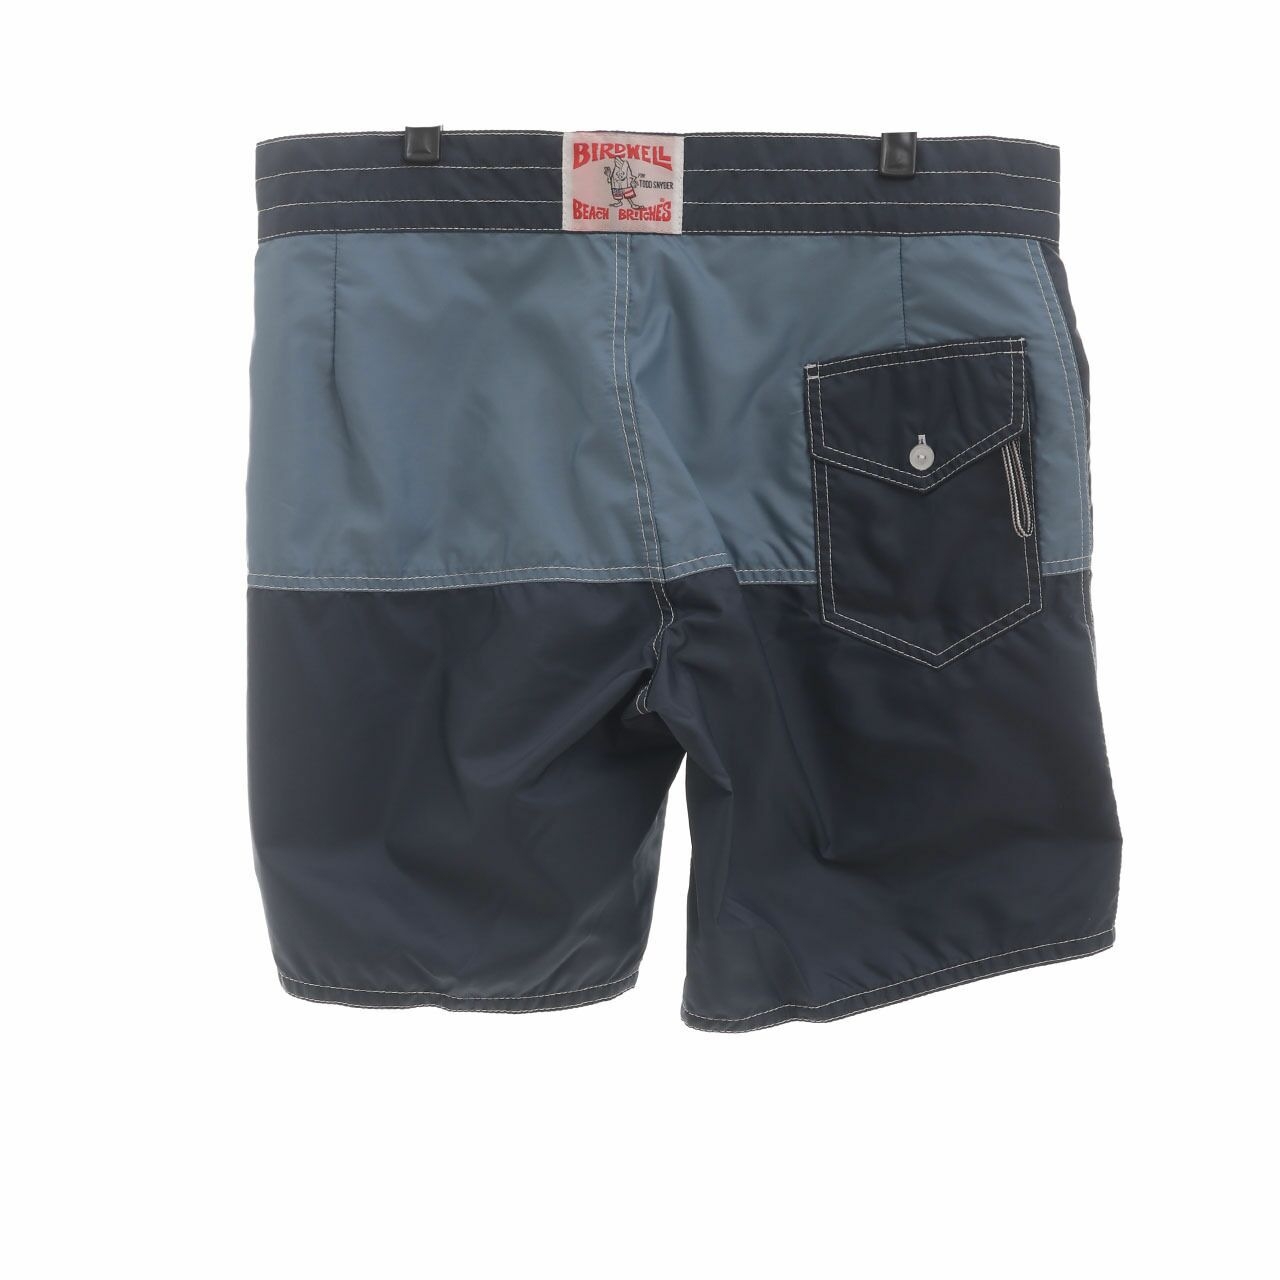 Birdwell Beach Britches for Todd Synder Blue Green Colorblock Shorts Pants